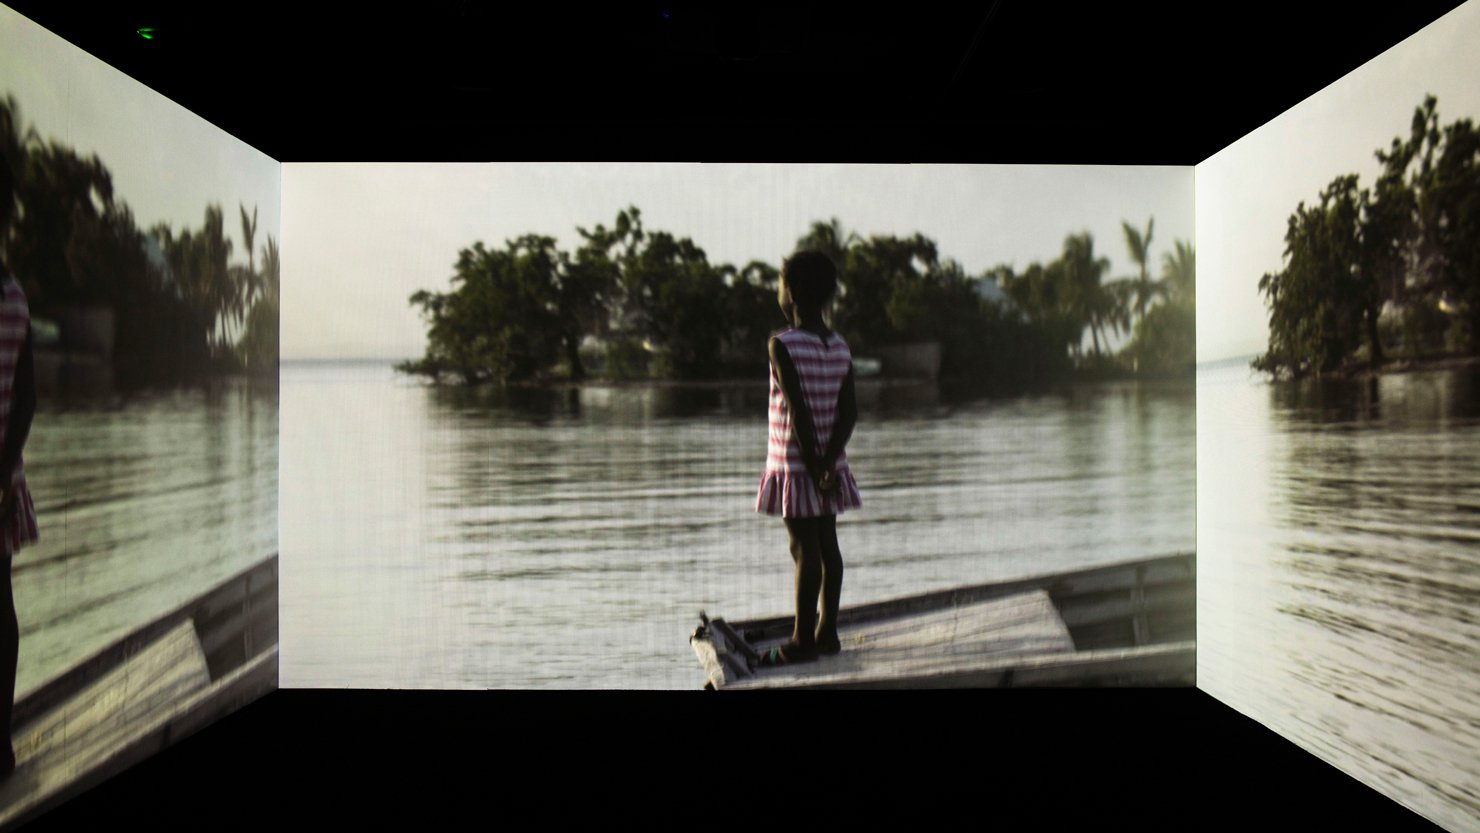 A still from 'Narrenschiff', 2017 by Kehinde Wiley